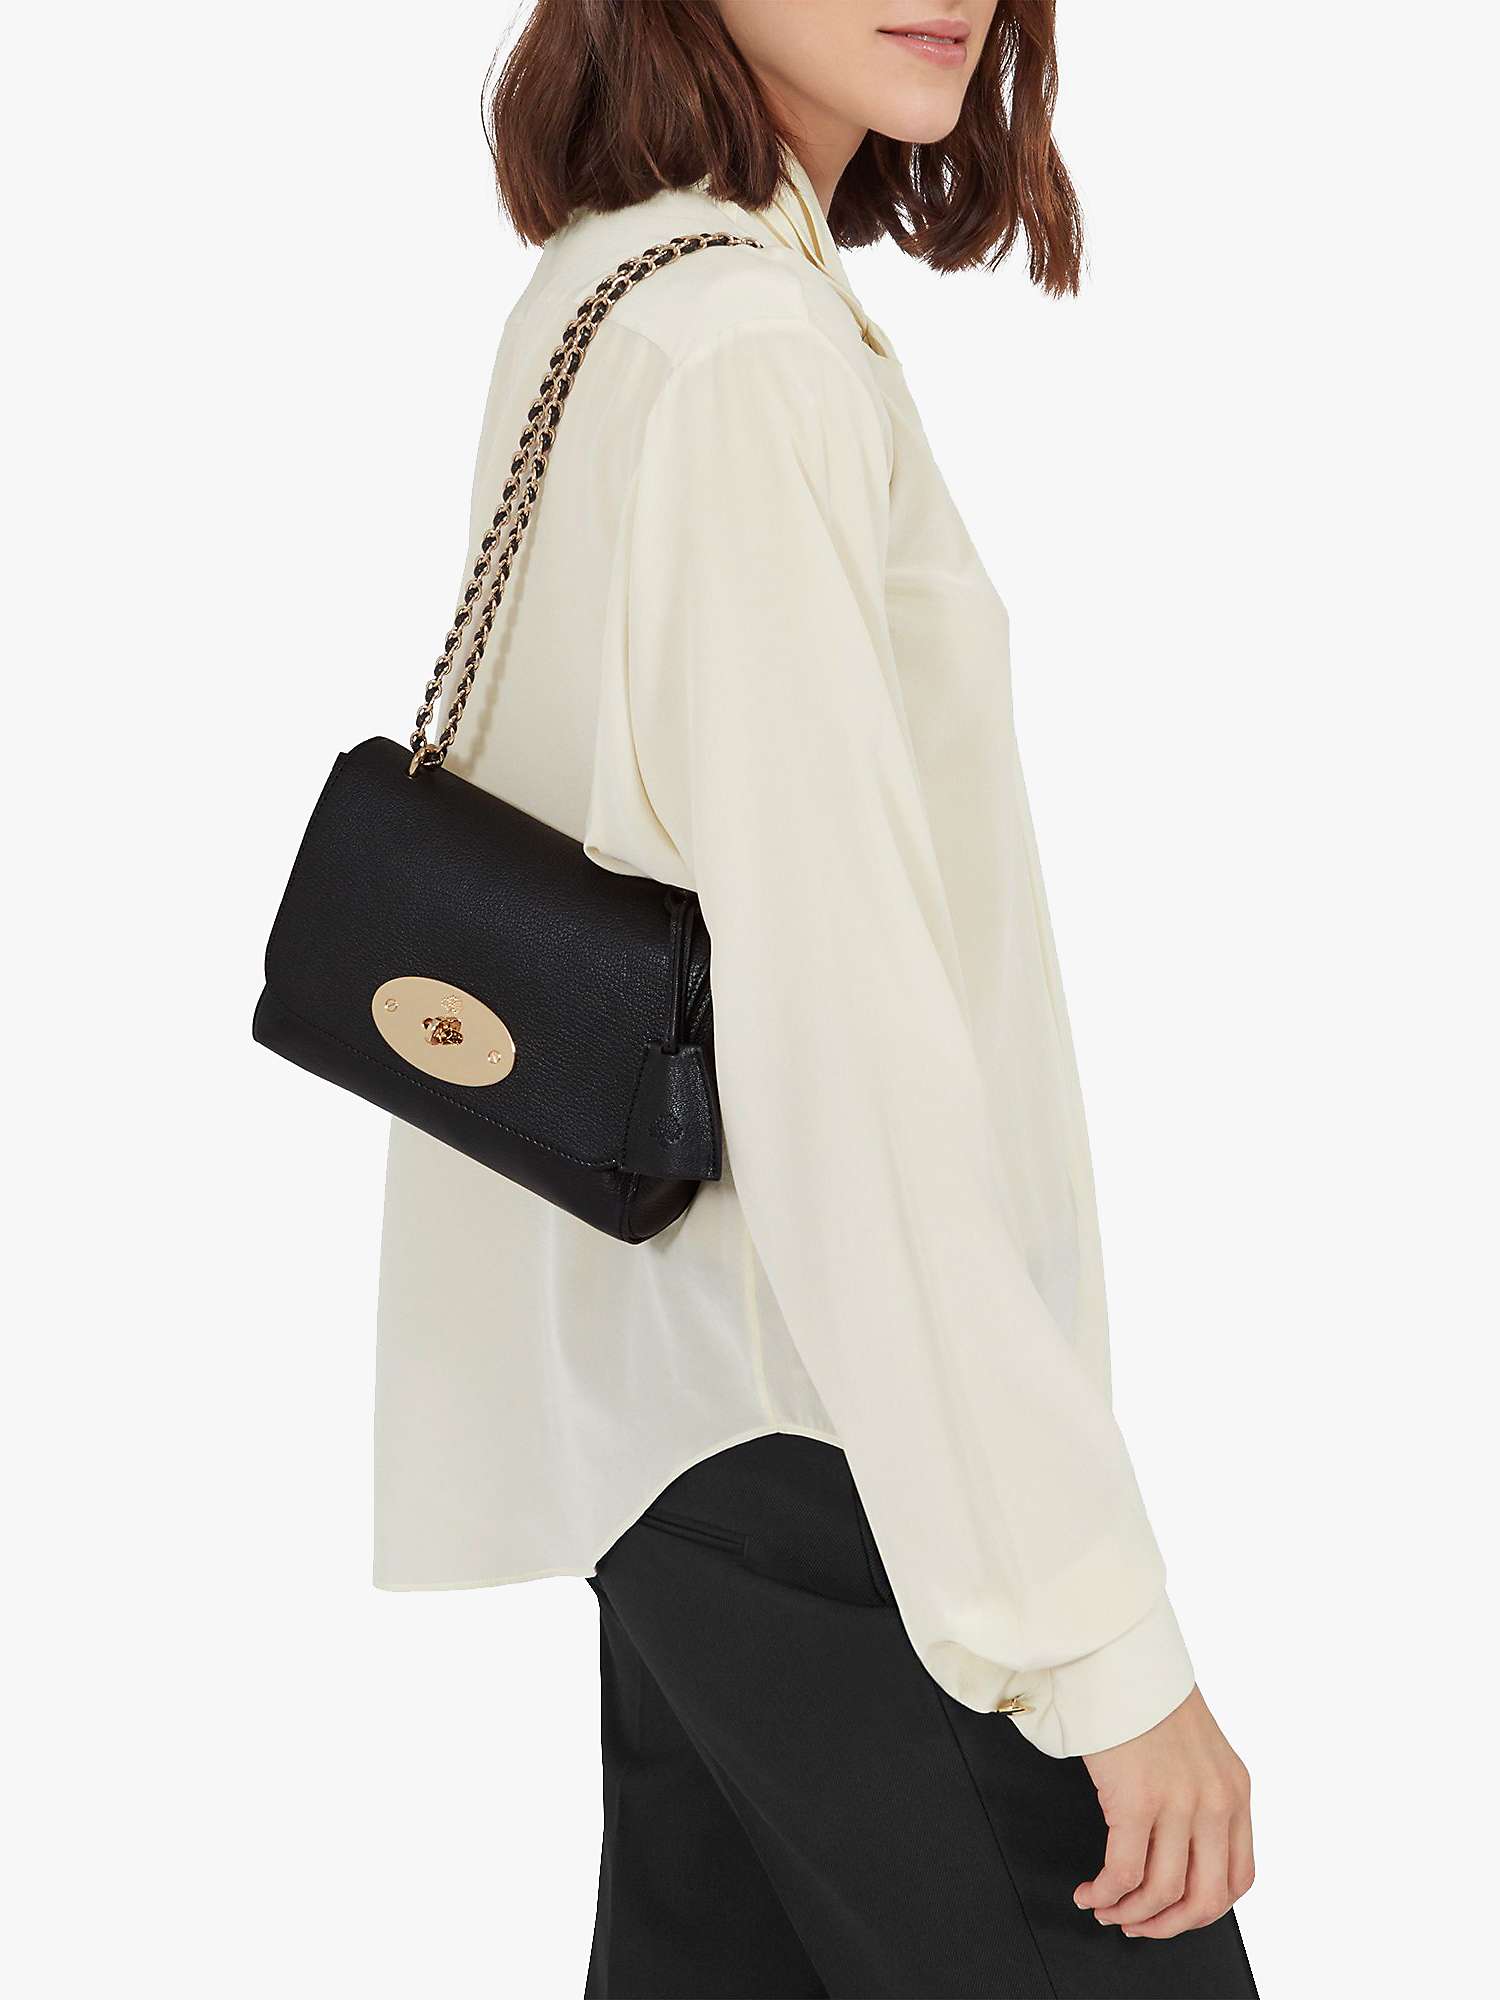 Buy Mulberry Lily Glossy Goat Leather Shoulder Bag Online at johnlewis.com